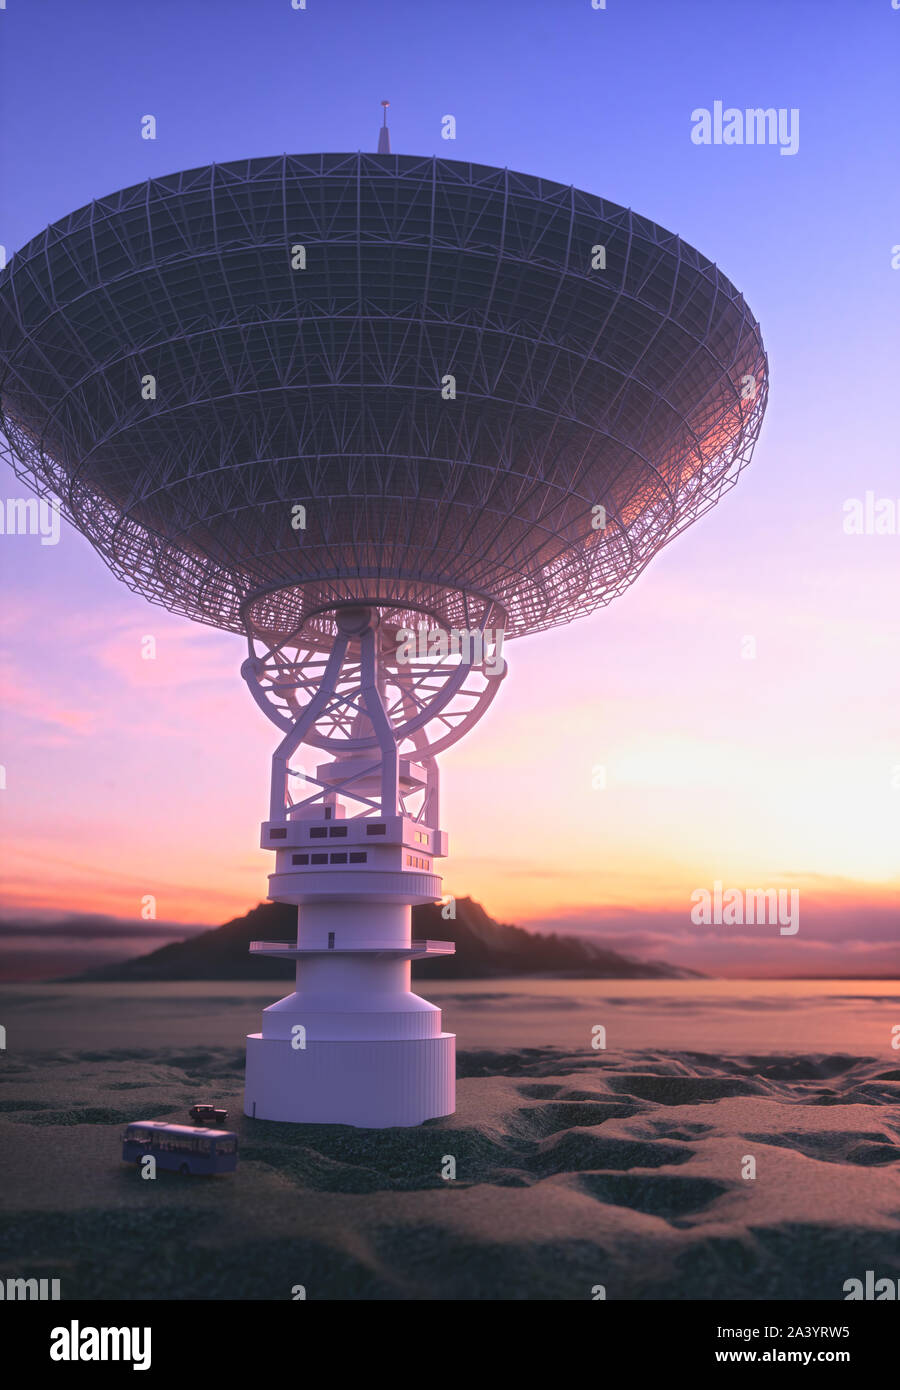 Huge satellite antenna dish for communication and signal reception out of the planet Earth. Observatory searching for radio signal in space at sunset. Stock Photo